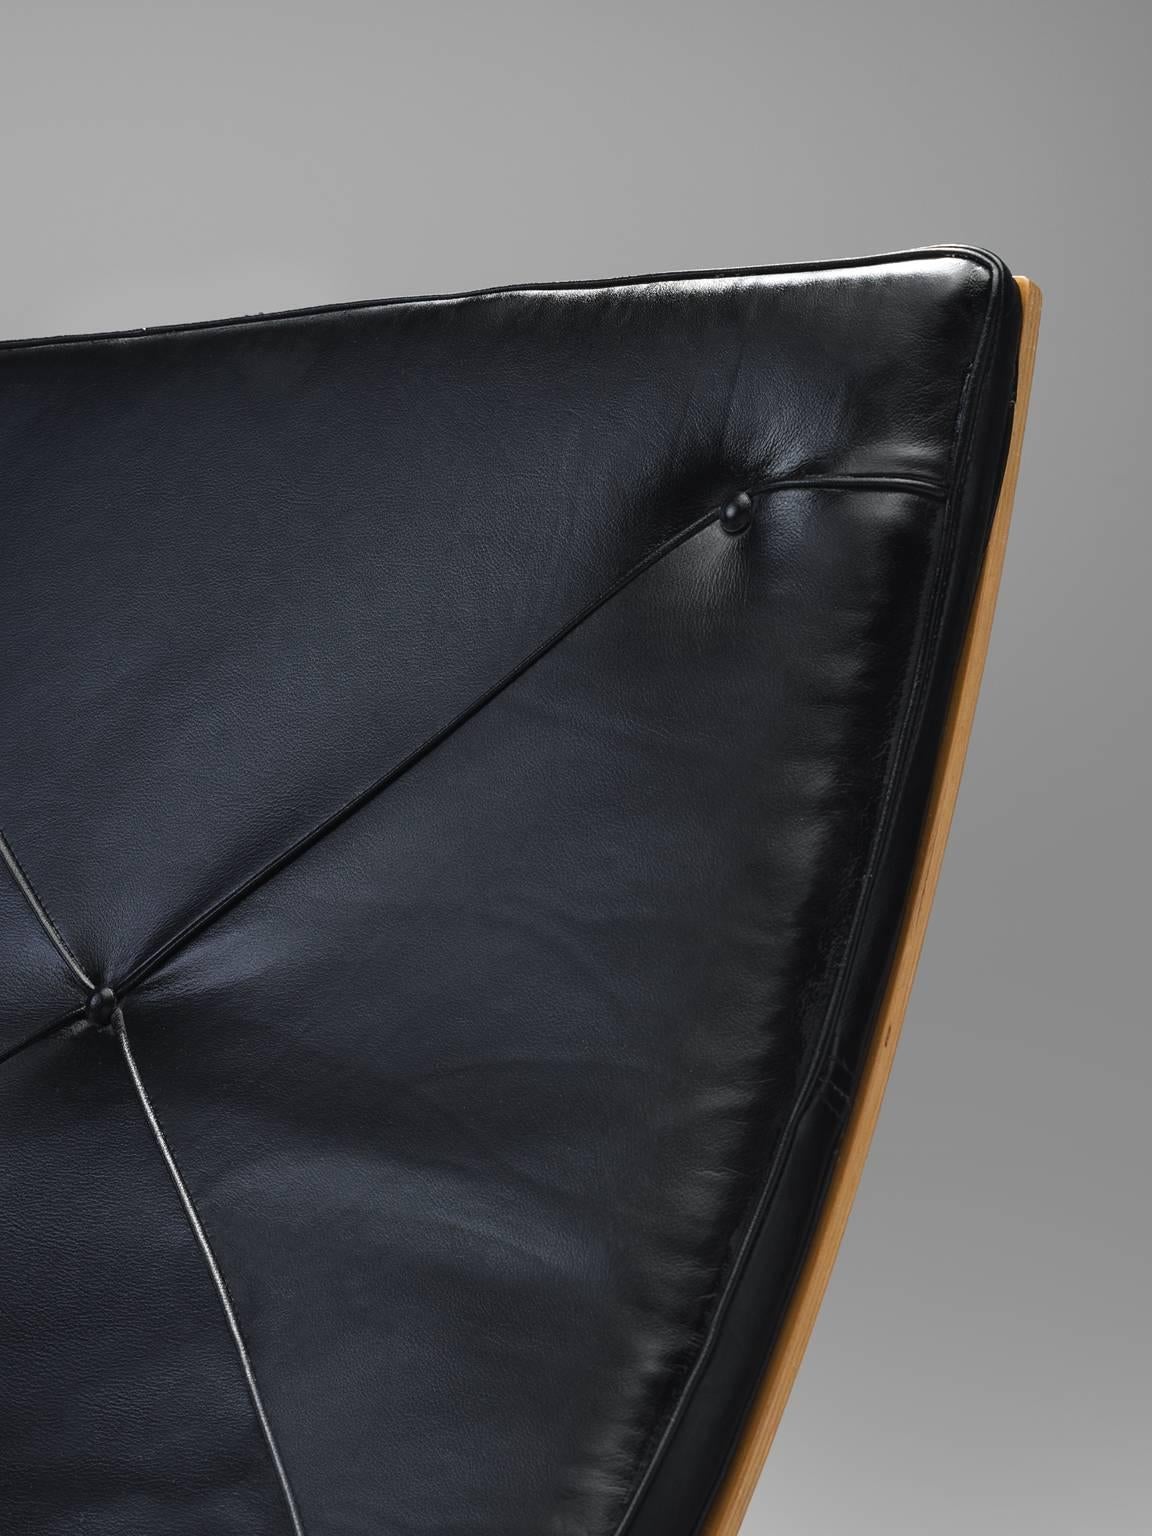 Late 20th Century Poul Kjærholm PK27 Lounge Chairs in Black Leather